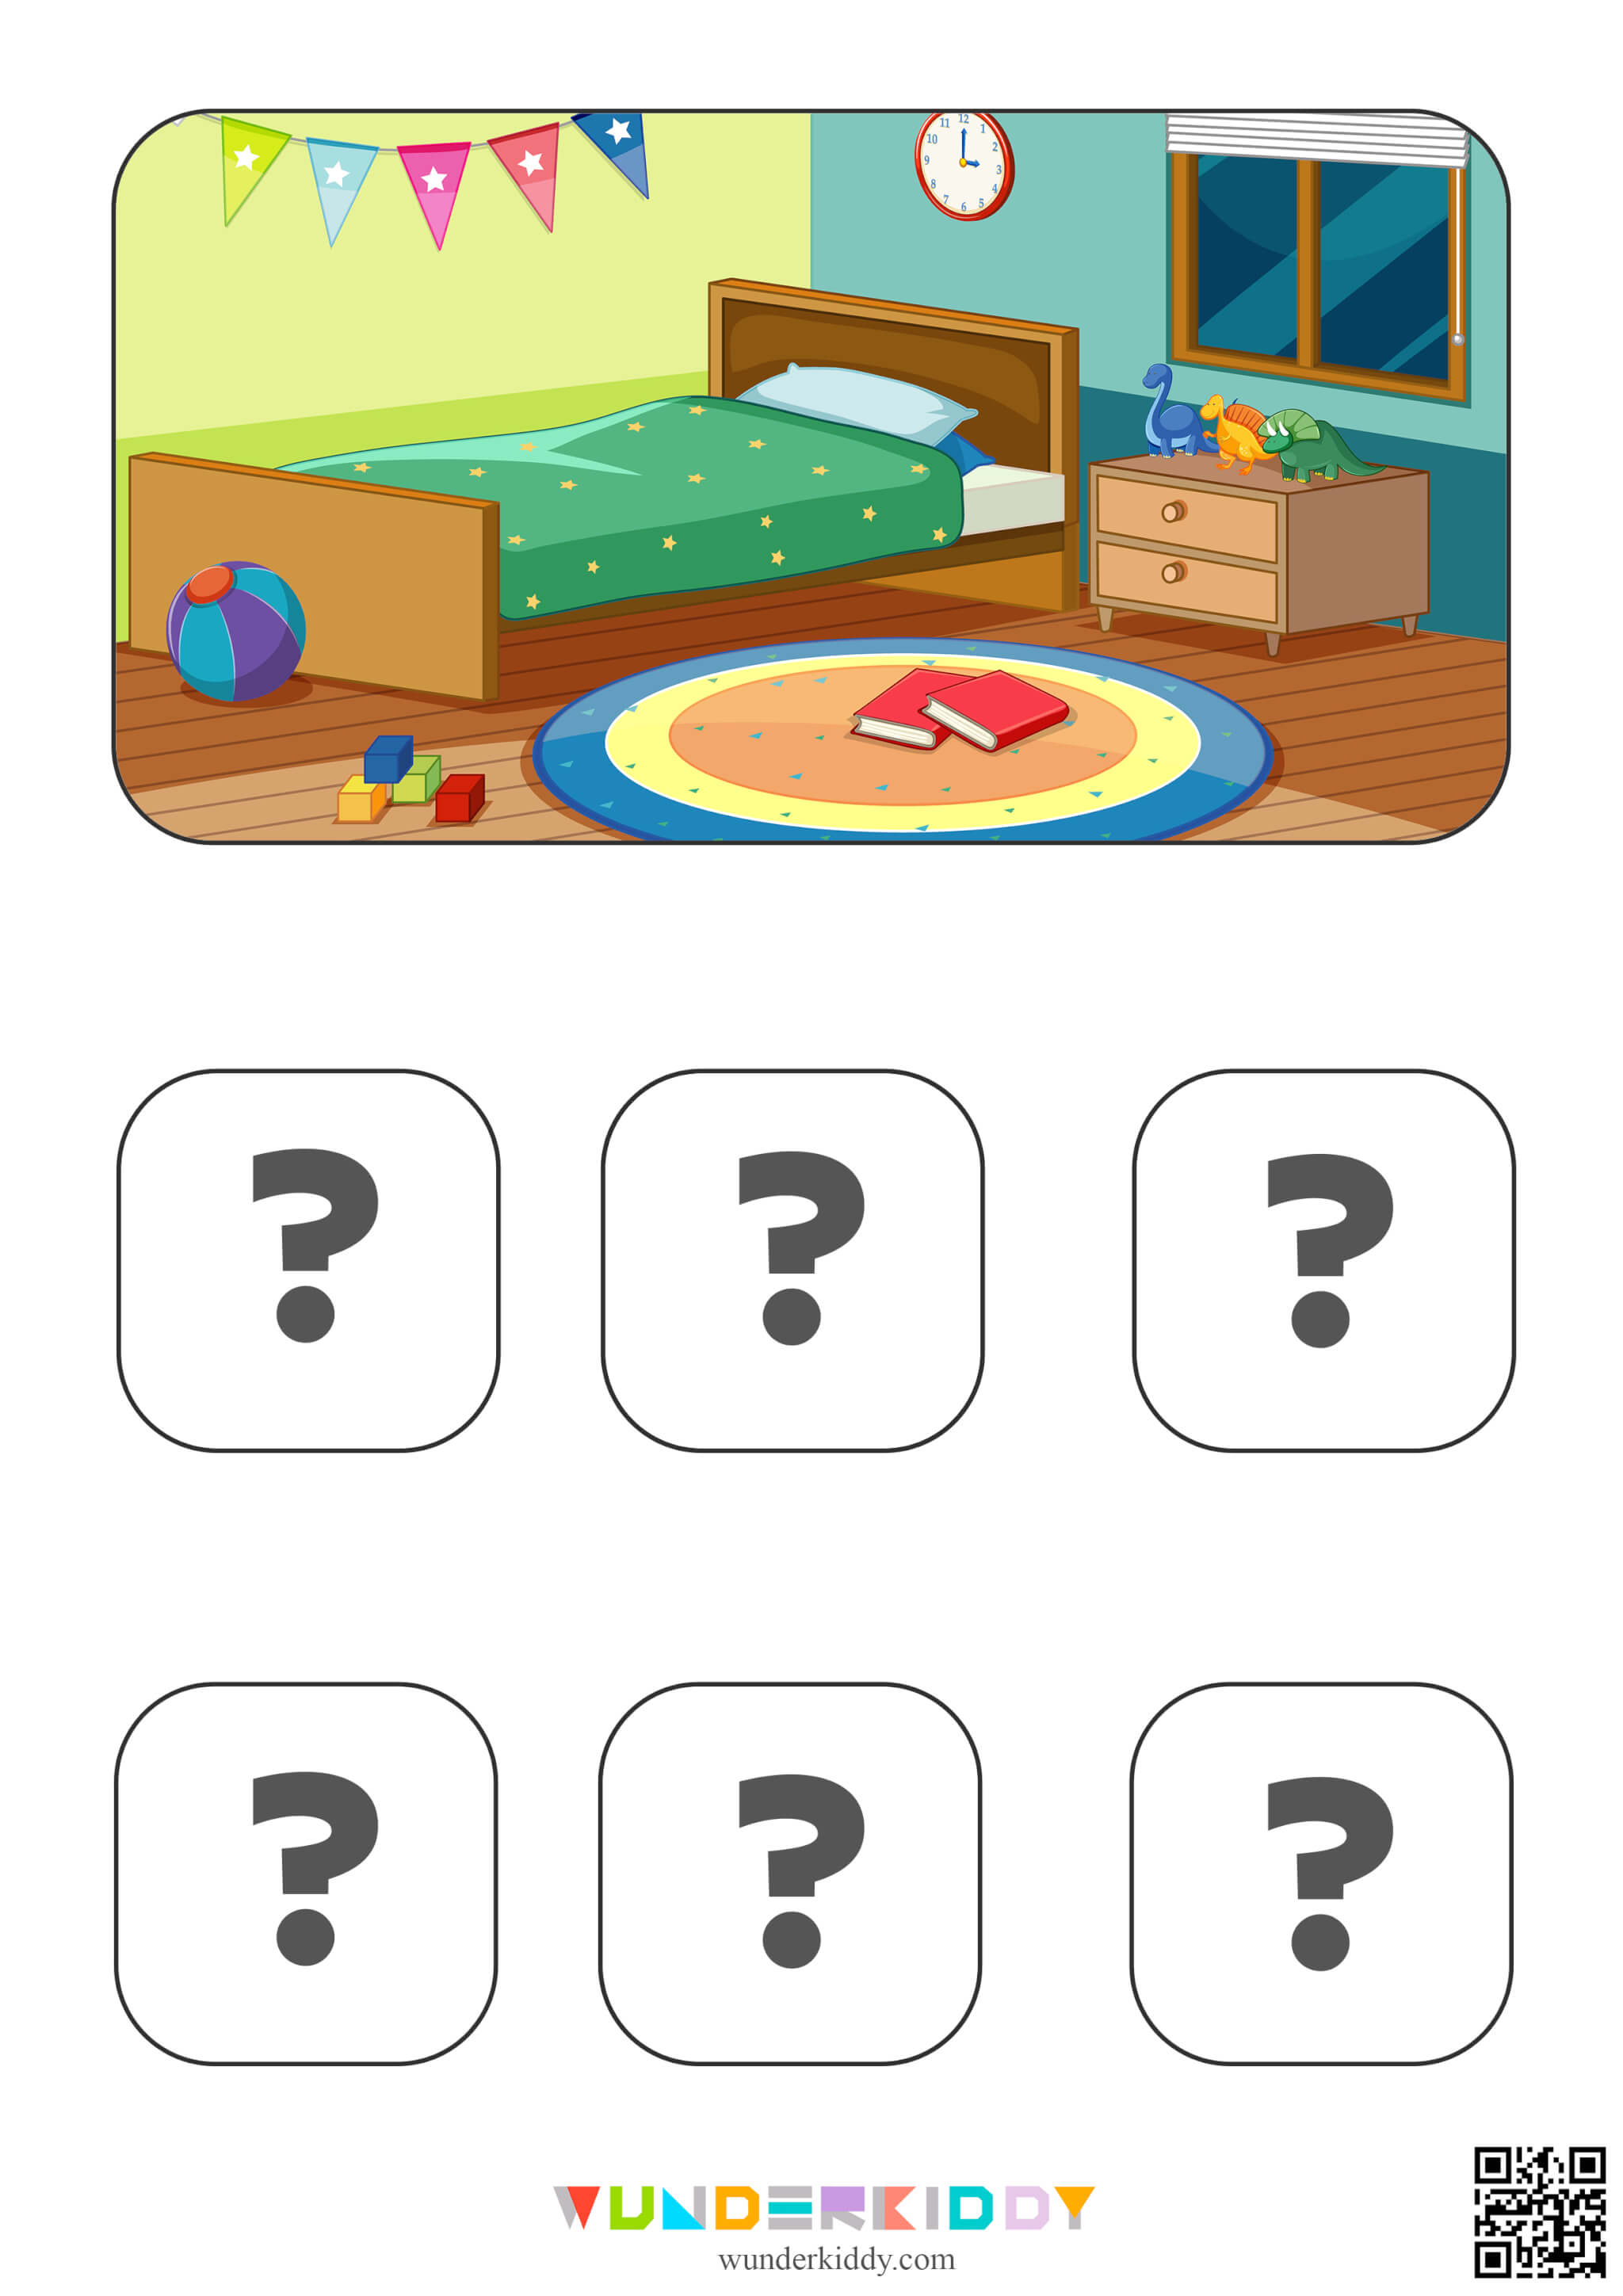 Toys Classification Sorting Game - Image 3